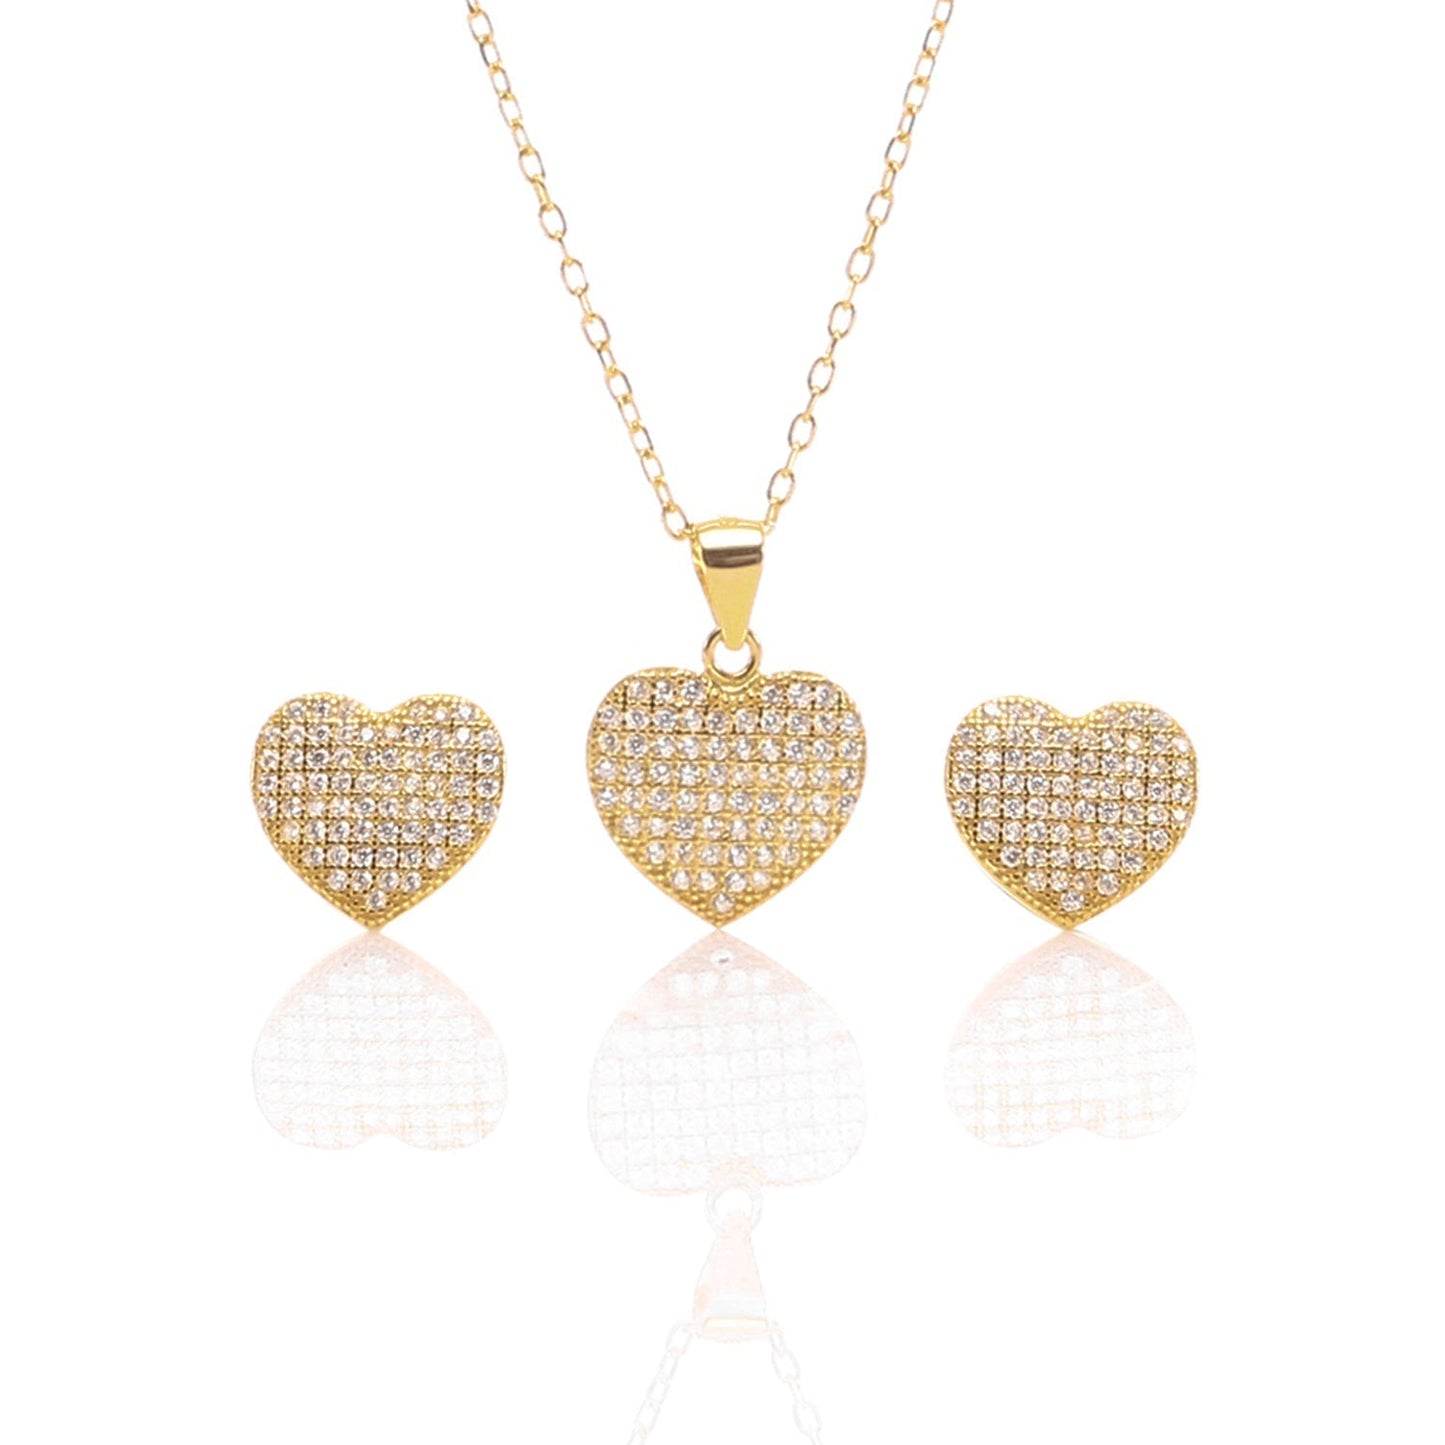 Heart Shaped Pendant Necklace and Earrings Set - ARJW1009GD ARCADIO